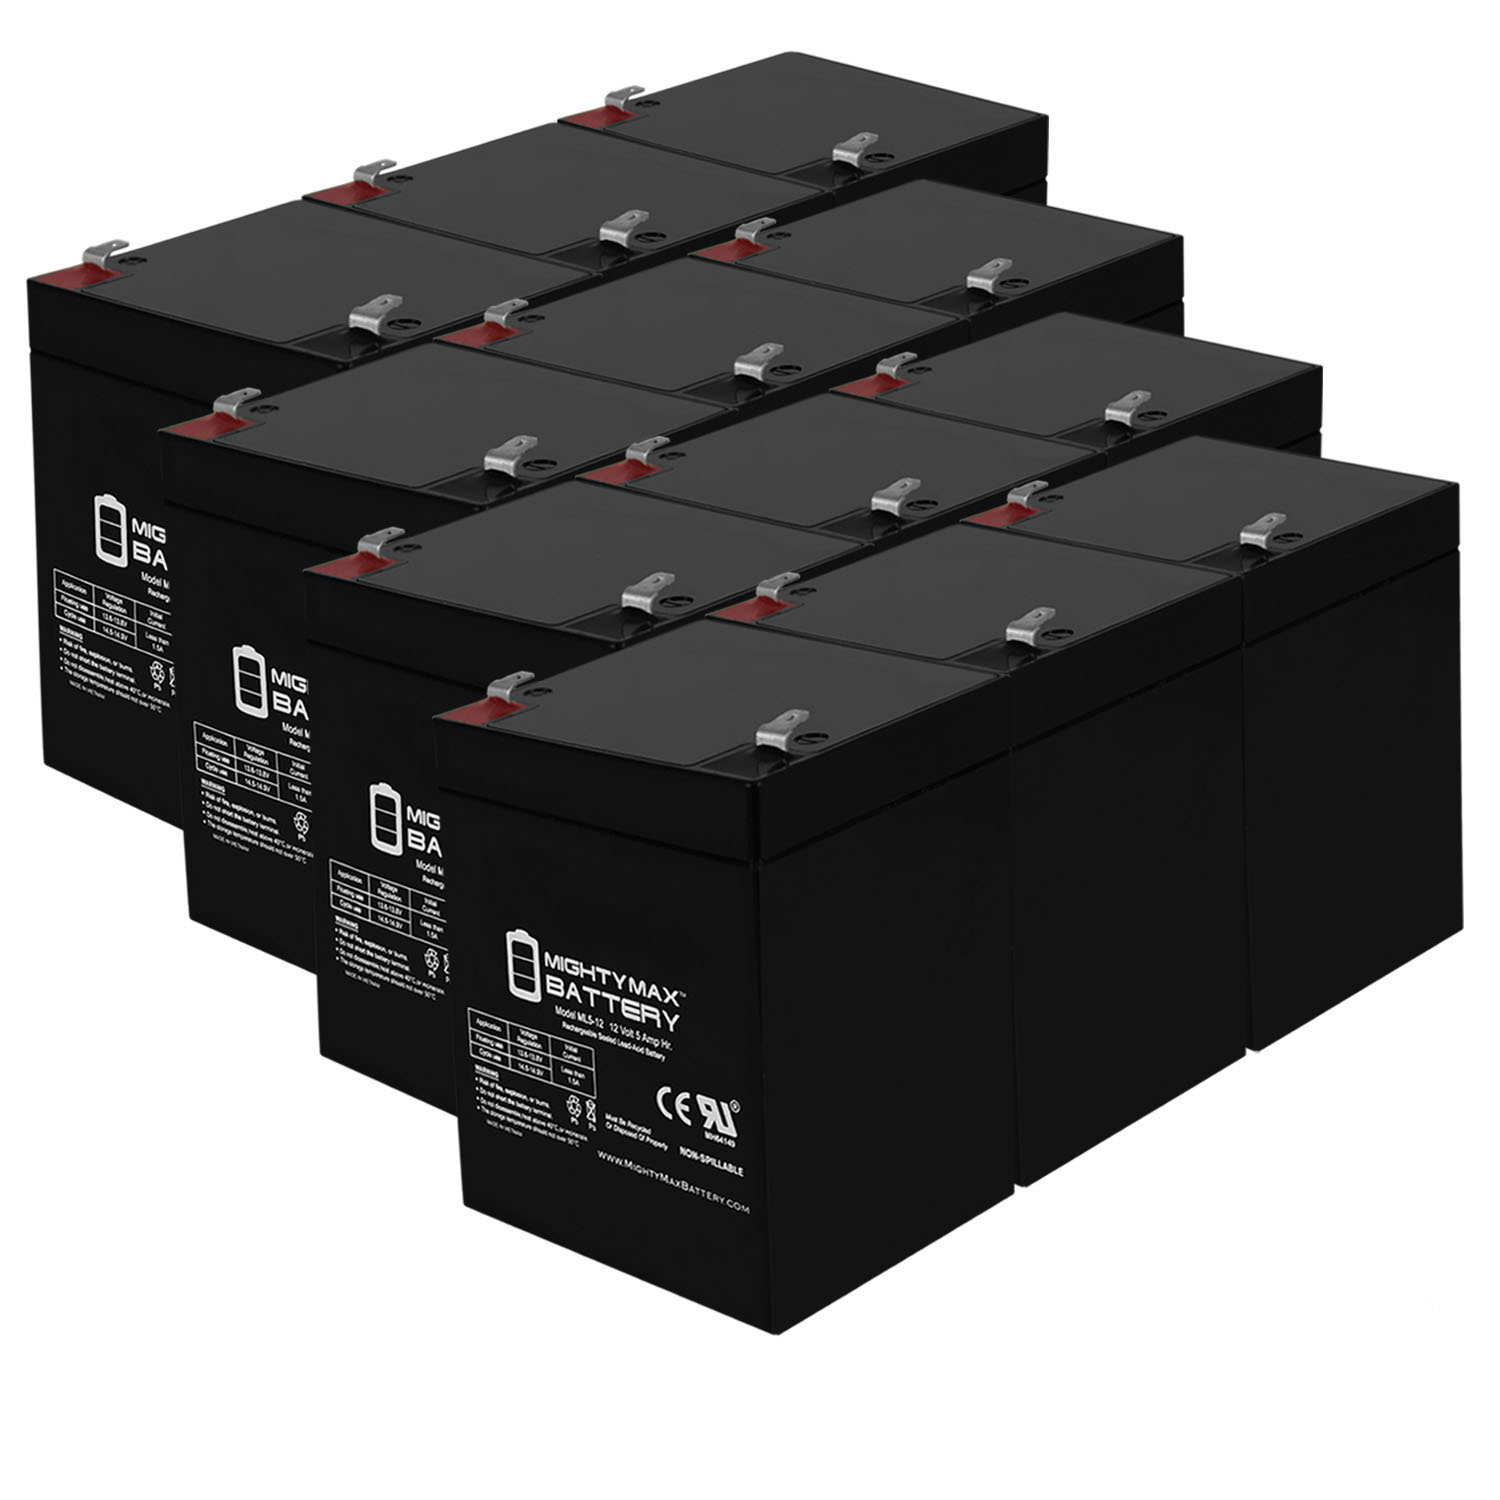 12V 5AH SLA Replacement Battery for Razor Electric Wagon 25144070 - 12 Pack